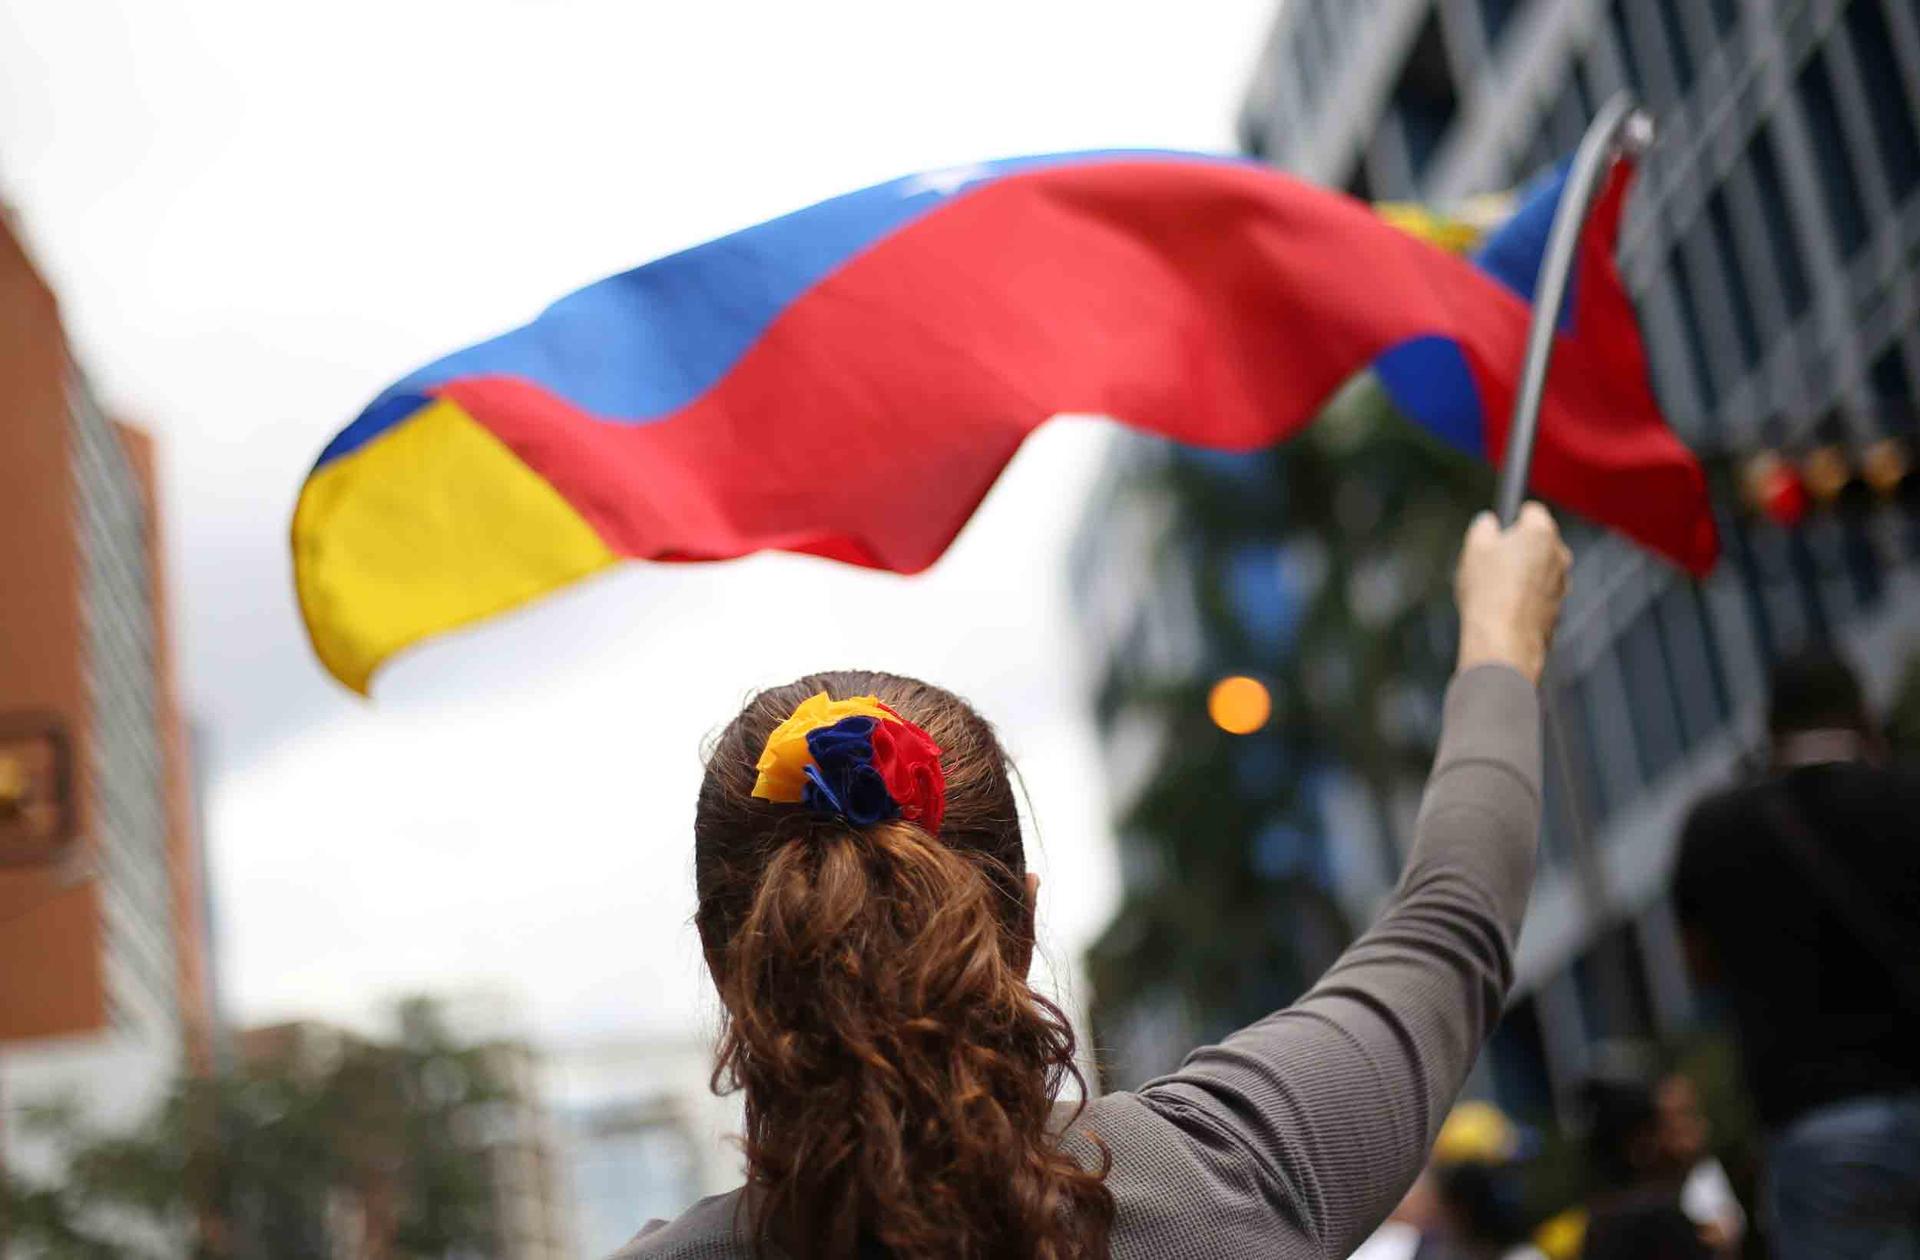 A woman stands with her back to the camera and waves a Venezuelan flag in front of her